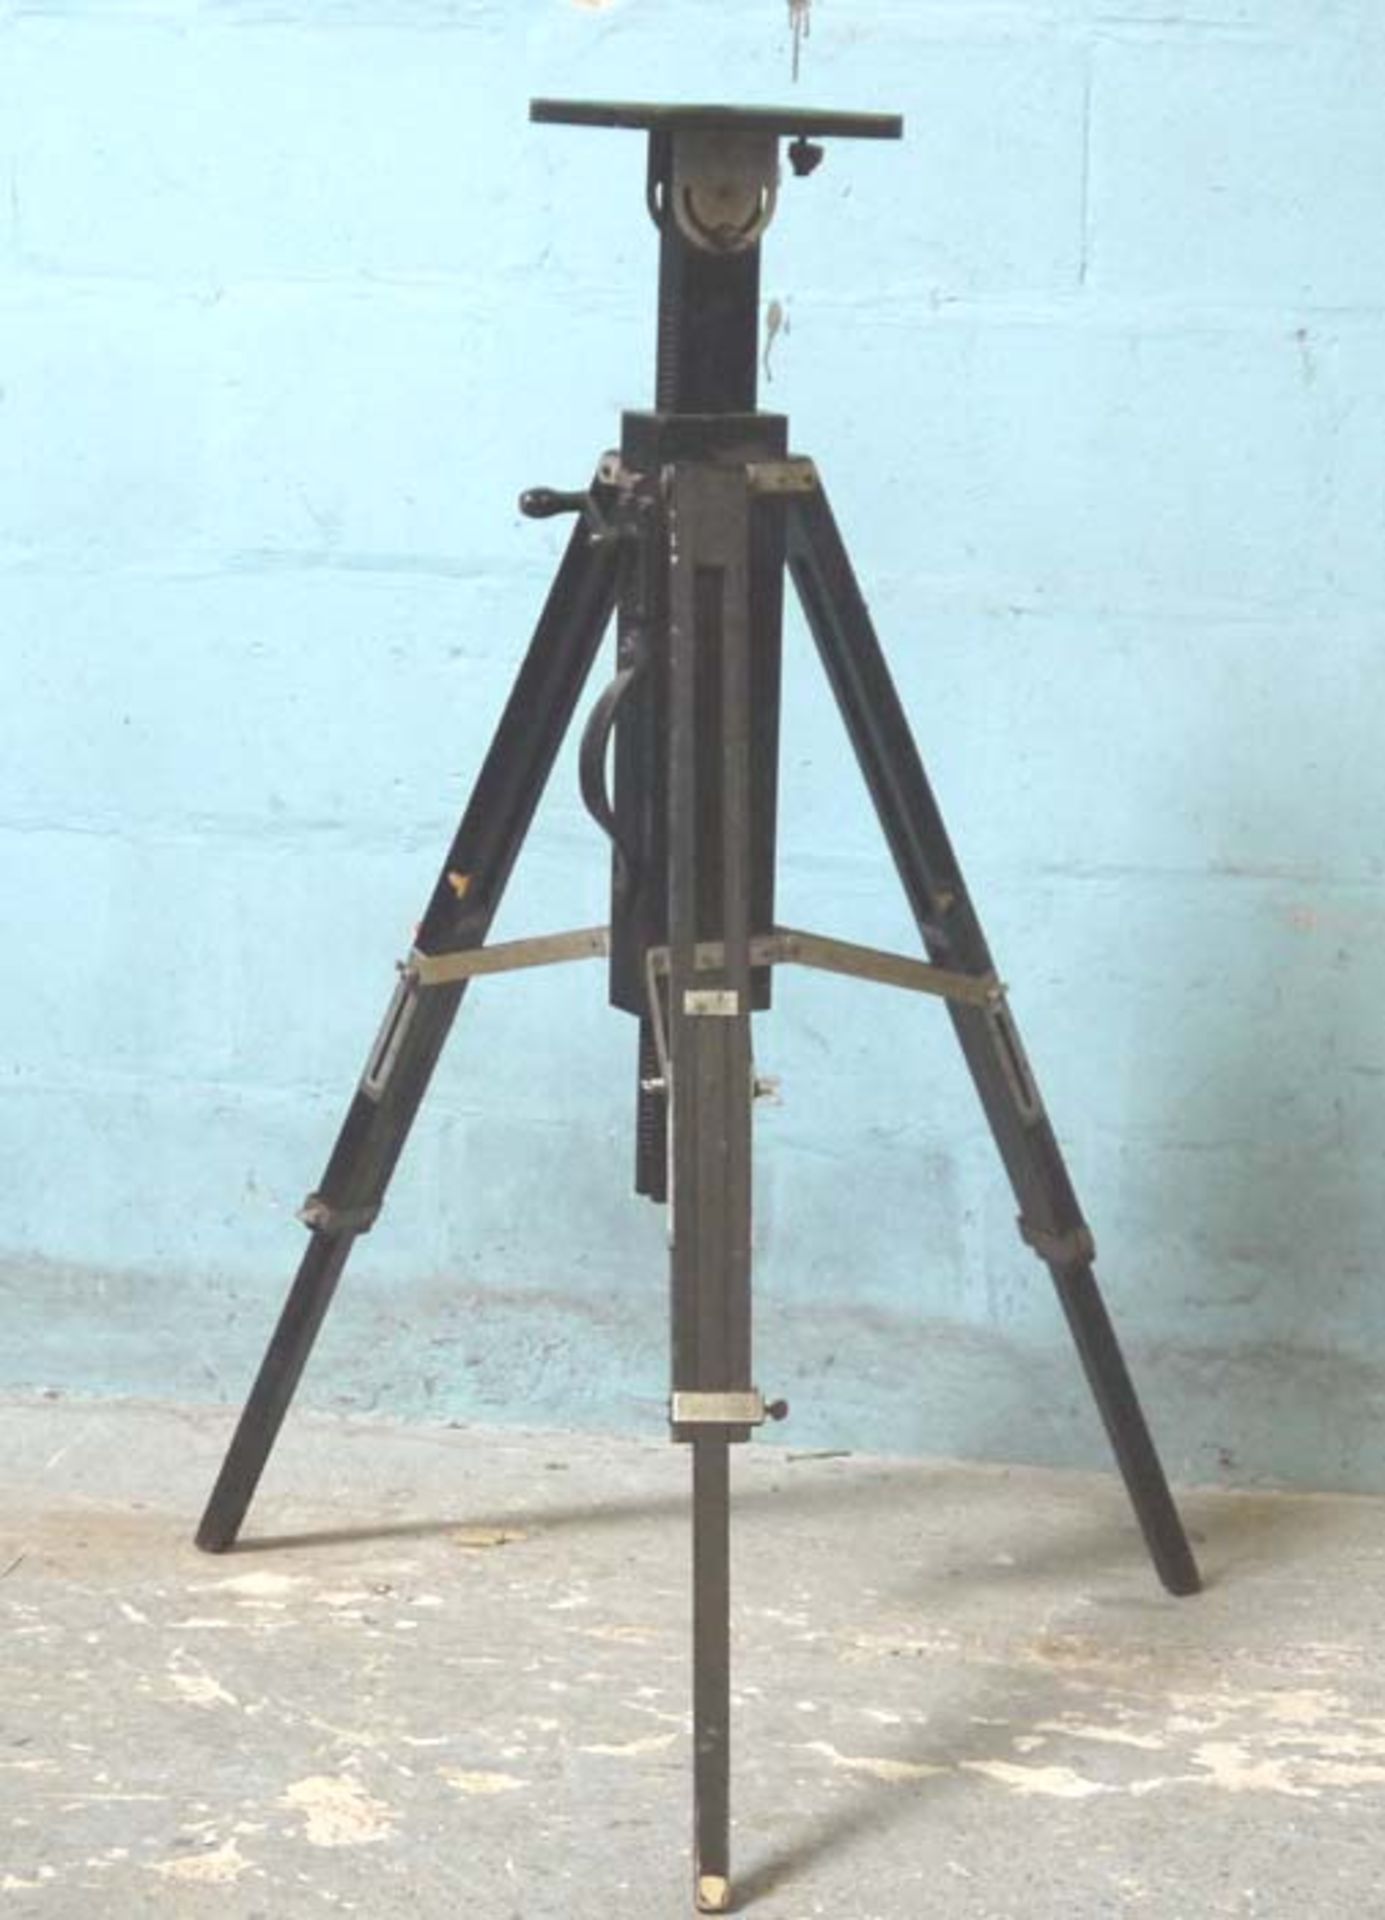 *WOODEN TRIPOD PAINTED BLACK. MAX 1830MM ( 72" ) HIGH X 760MM ( 30" ) DIAMETER OF BASE [0]